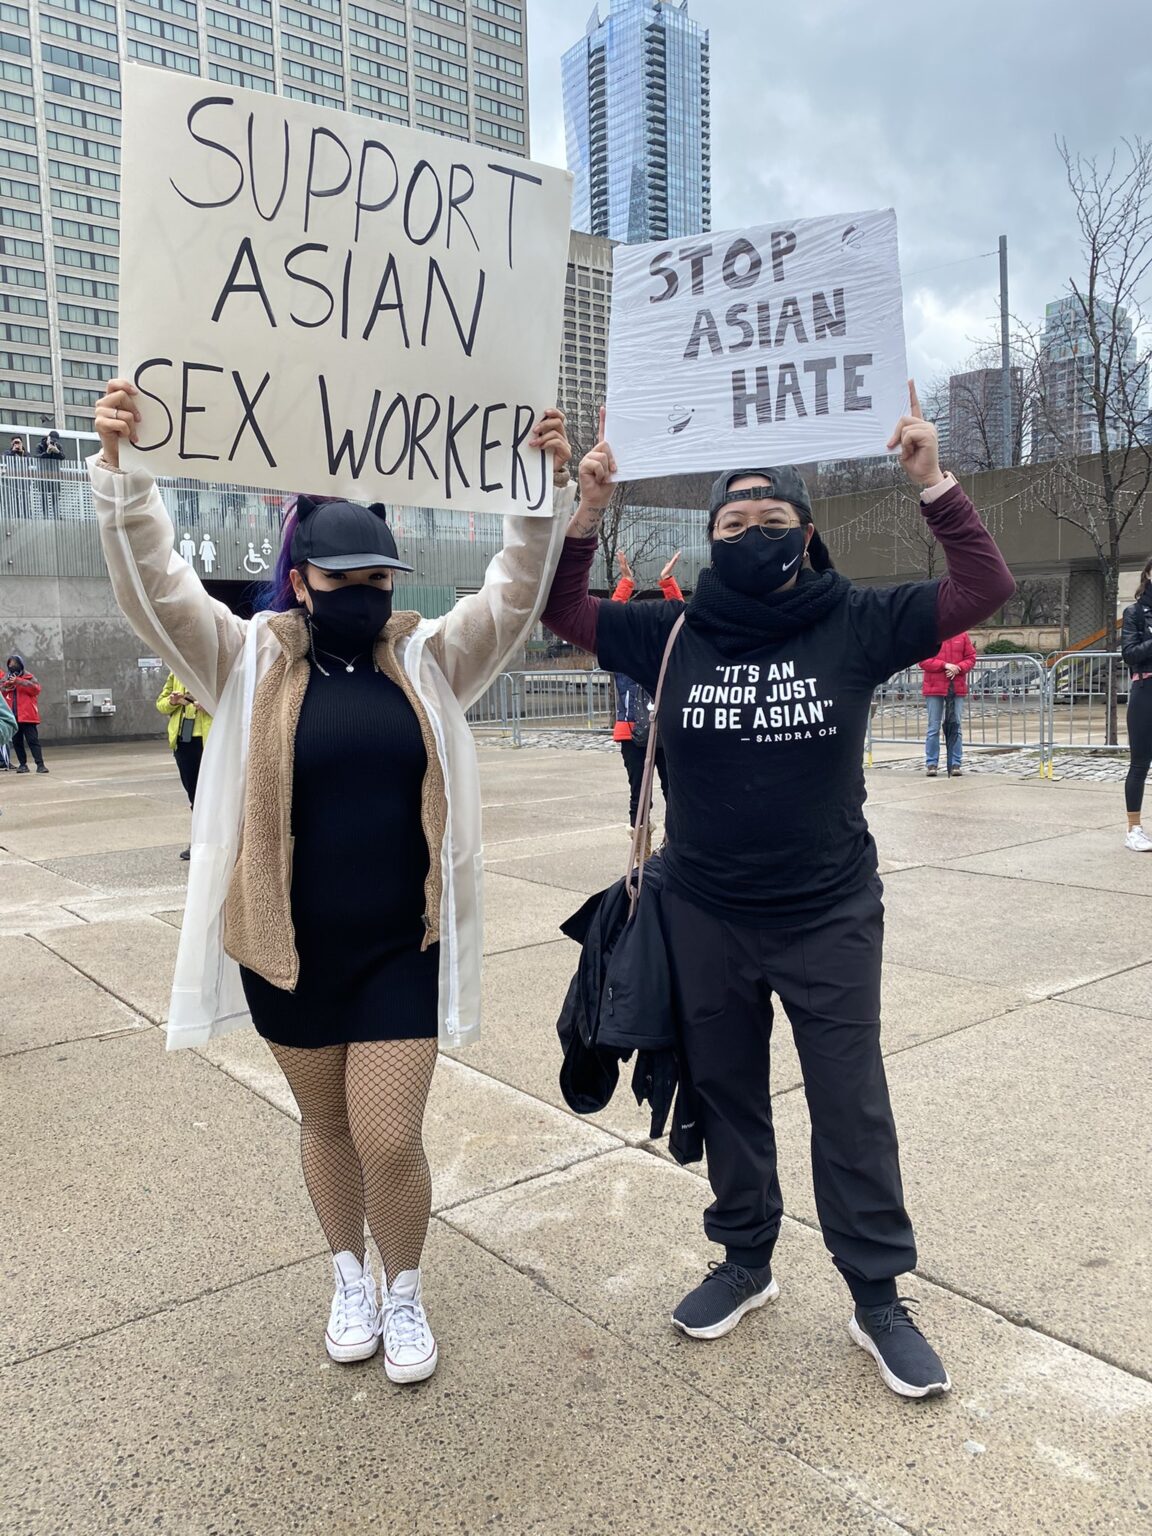 The Stopasianhate Conversation Cannot Ignore Sex Workers